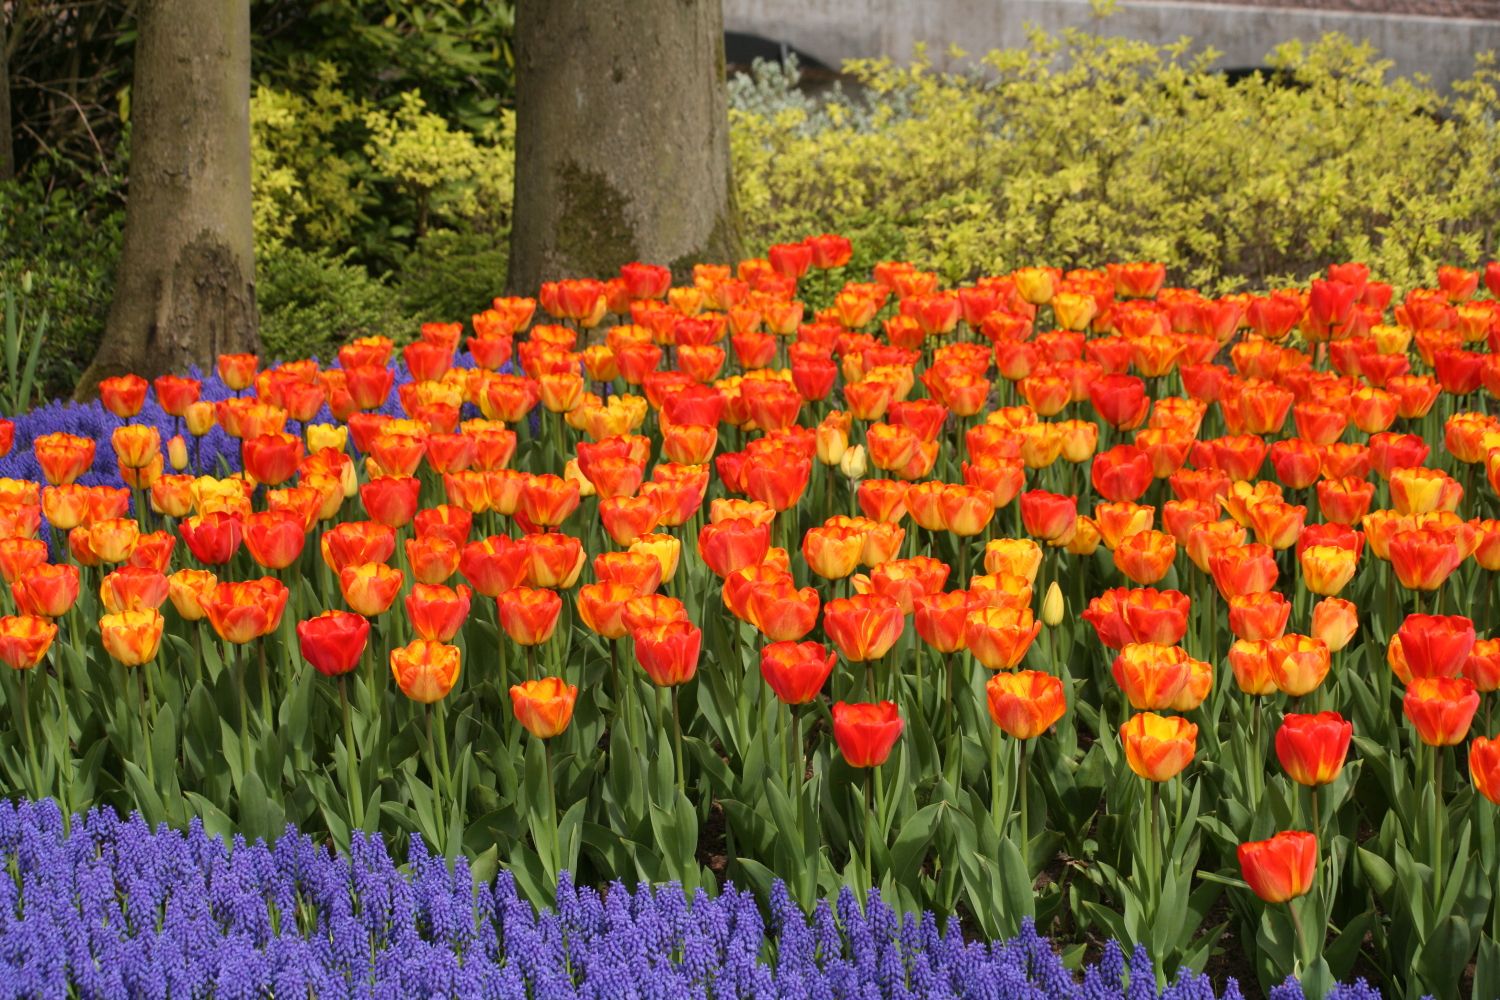 How to Plant Tulips - to Care Tulips